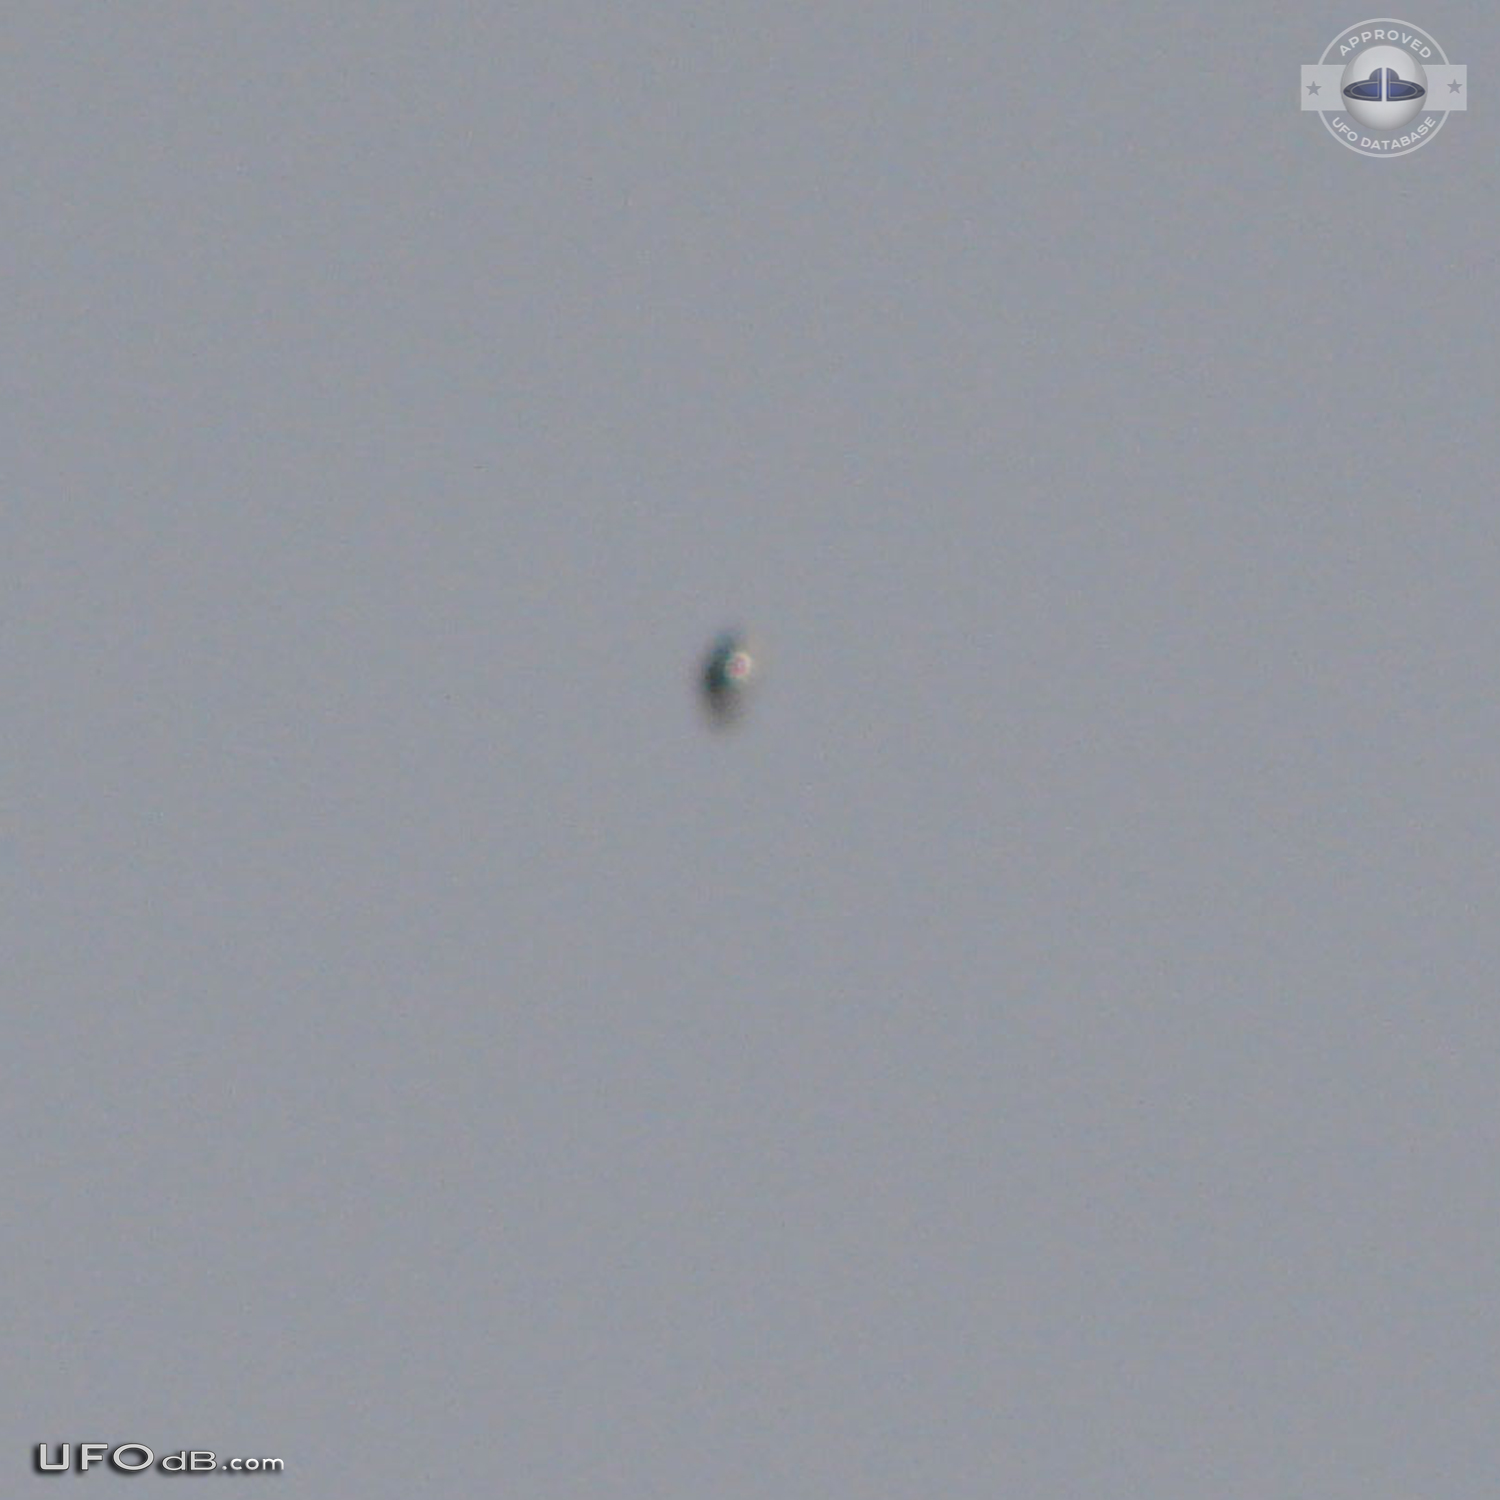 Shiny Upside-down Teardrop UFO rotating in the sky San Marcos CA USA UFO Picture #623-2